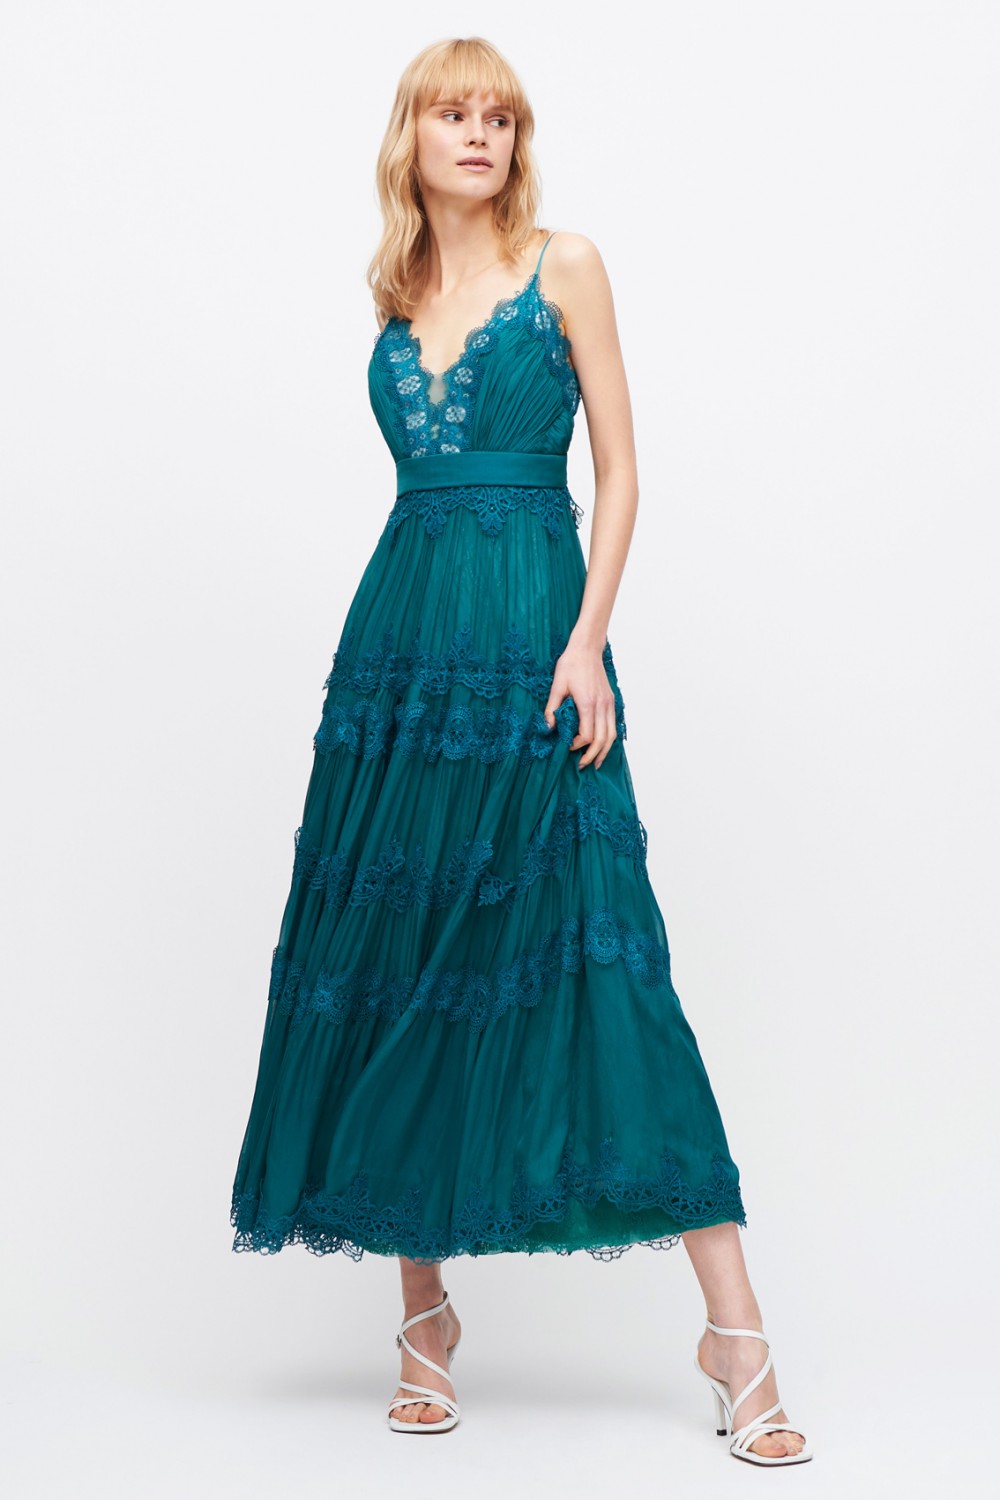 Green dress with lace embroidery and worked neckline 